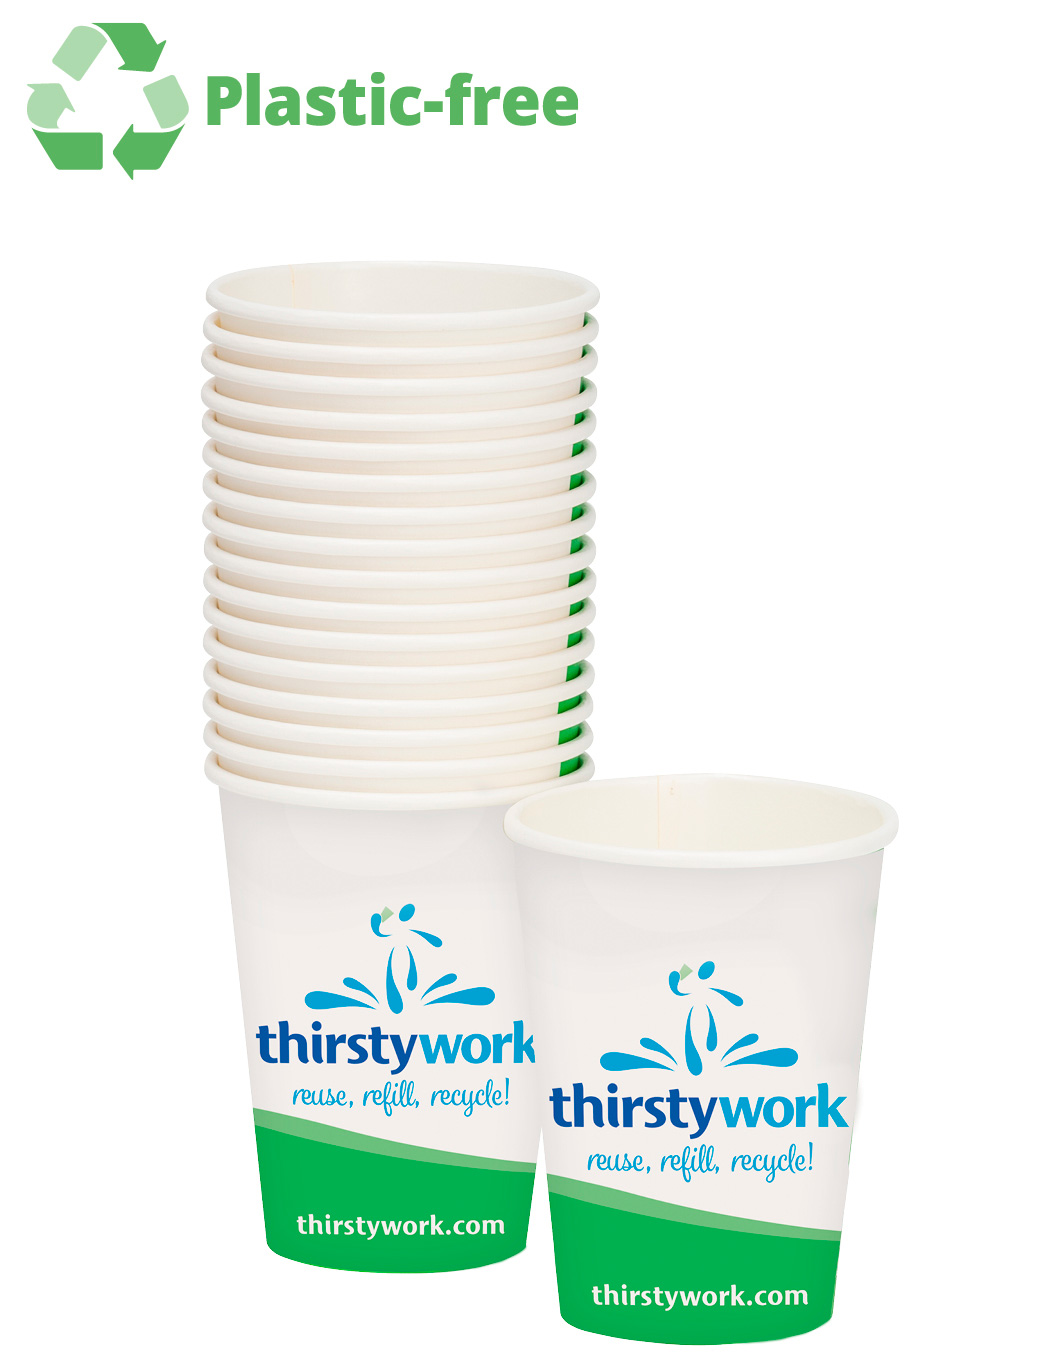 Plastic-free compostable and biodegradable paper cups